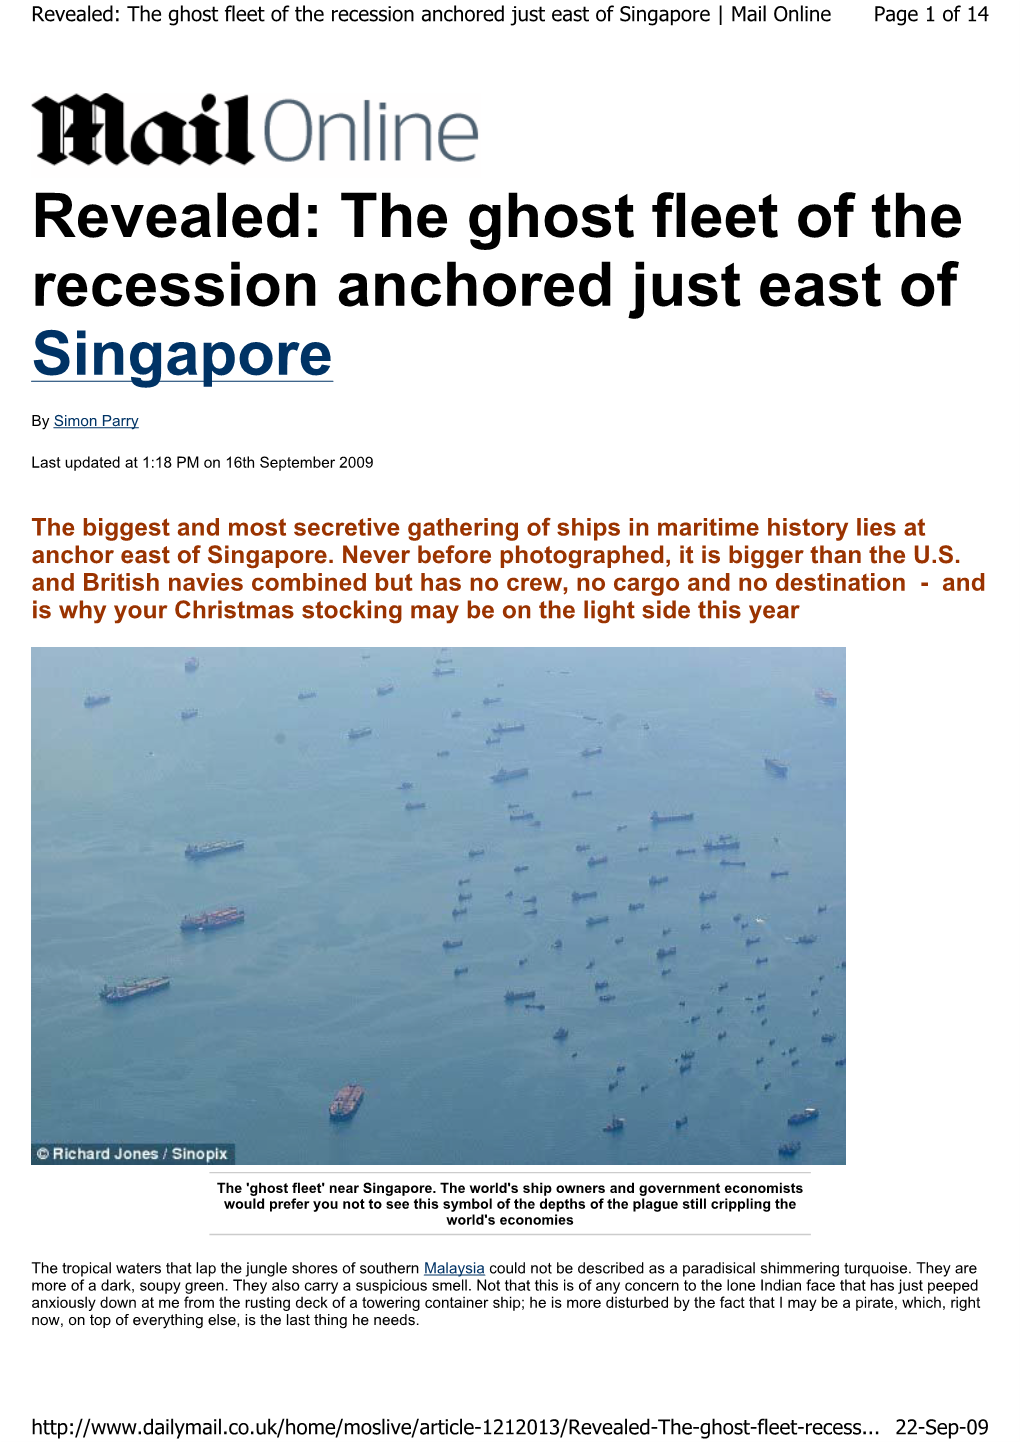 The Ghost Fleet of the Recession Anchored Just East of Singapore | Mail Online Page 1 of 14